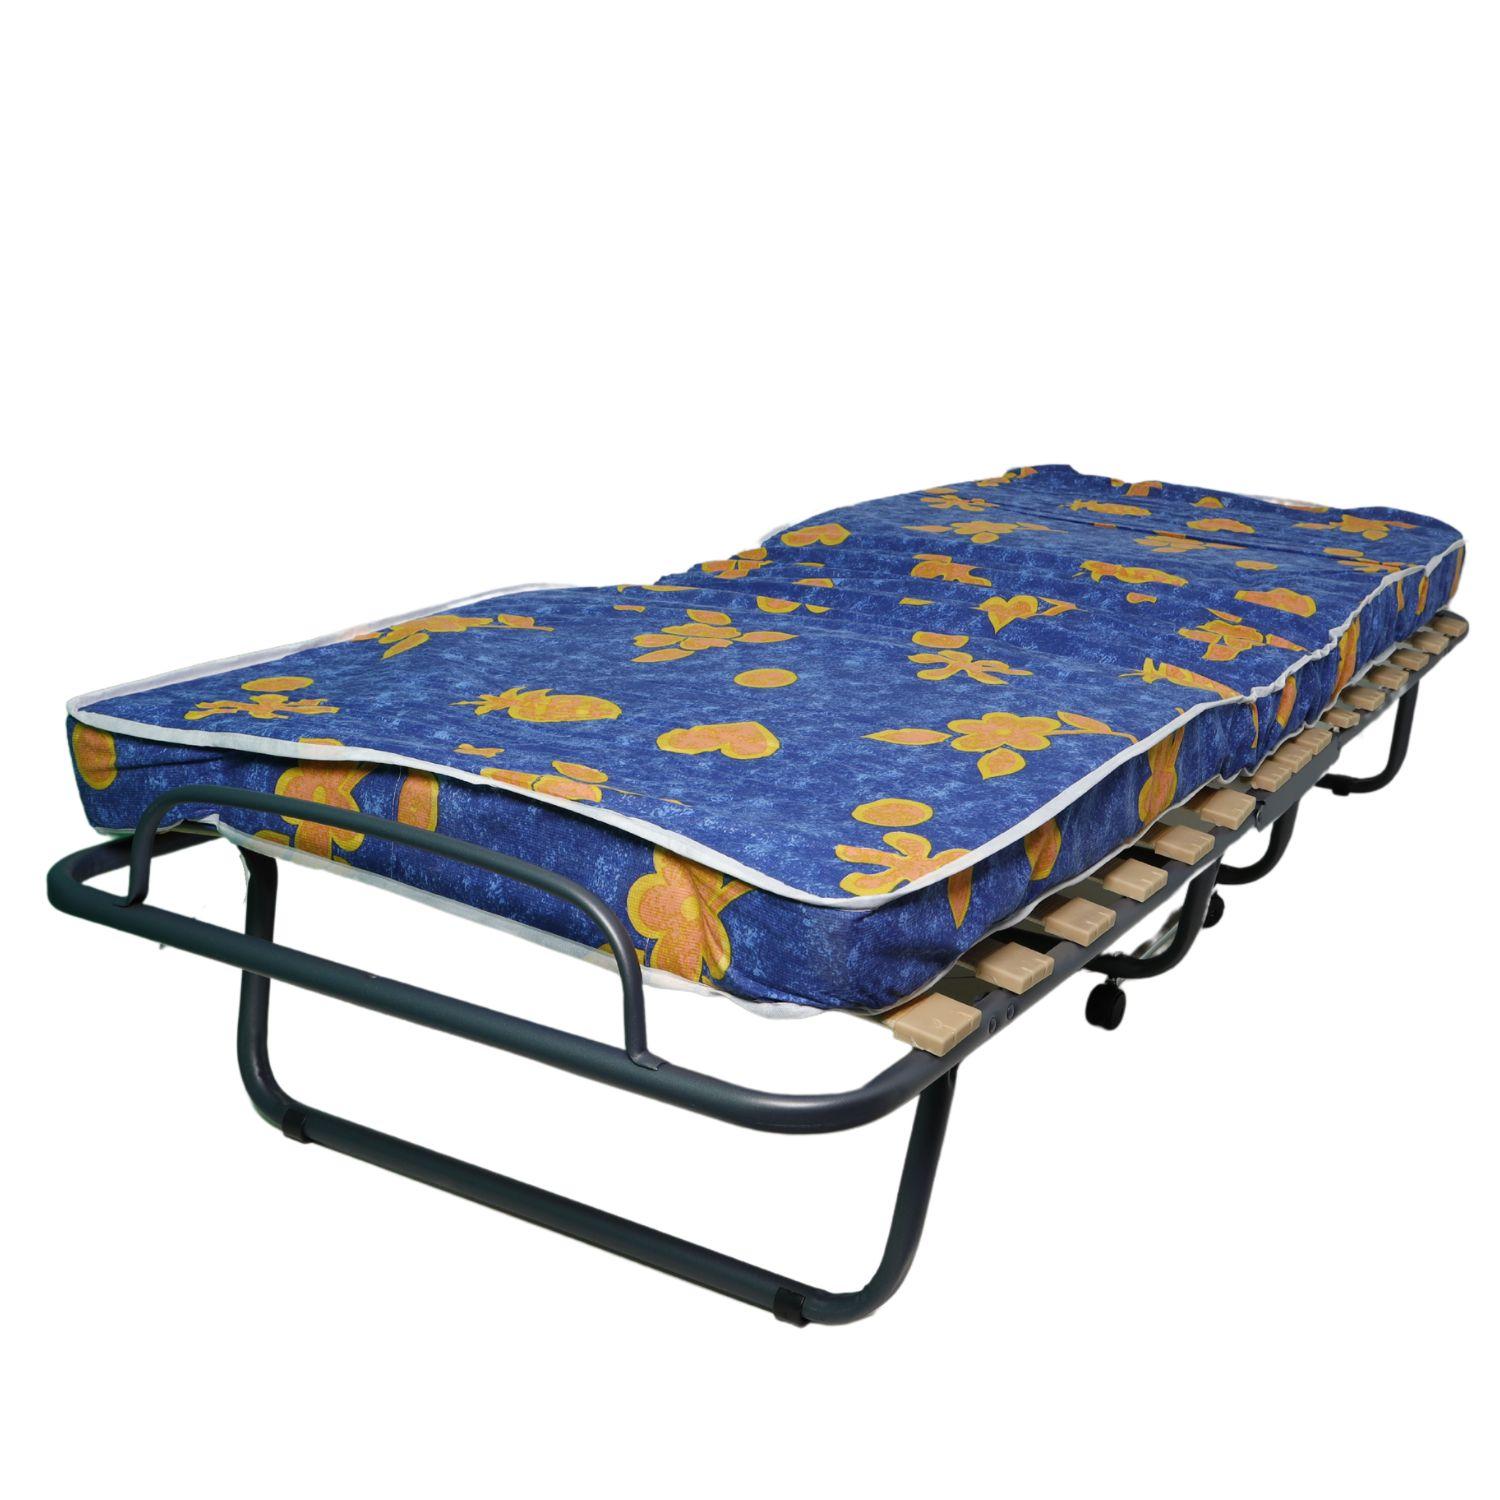 Foldable Bed with Wheels ARDIS 190 x 80 cm